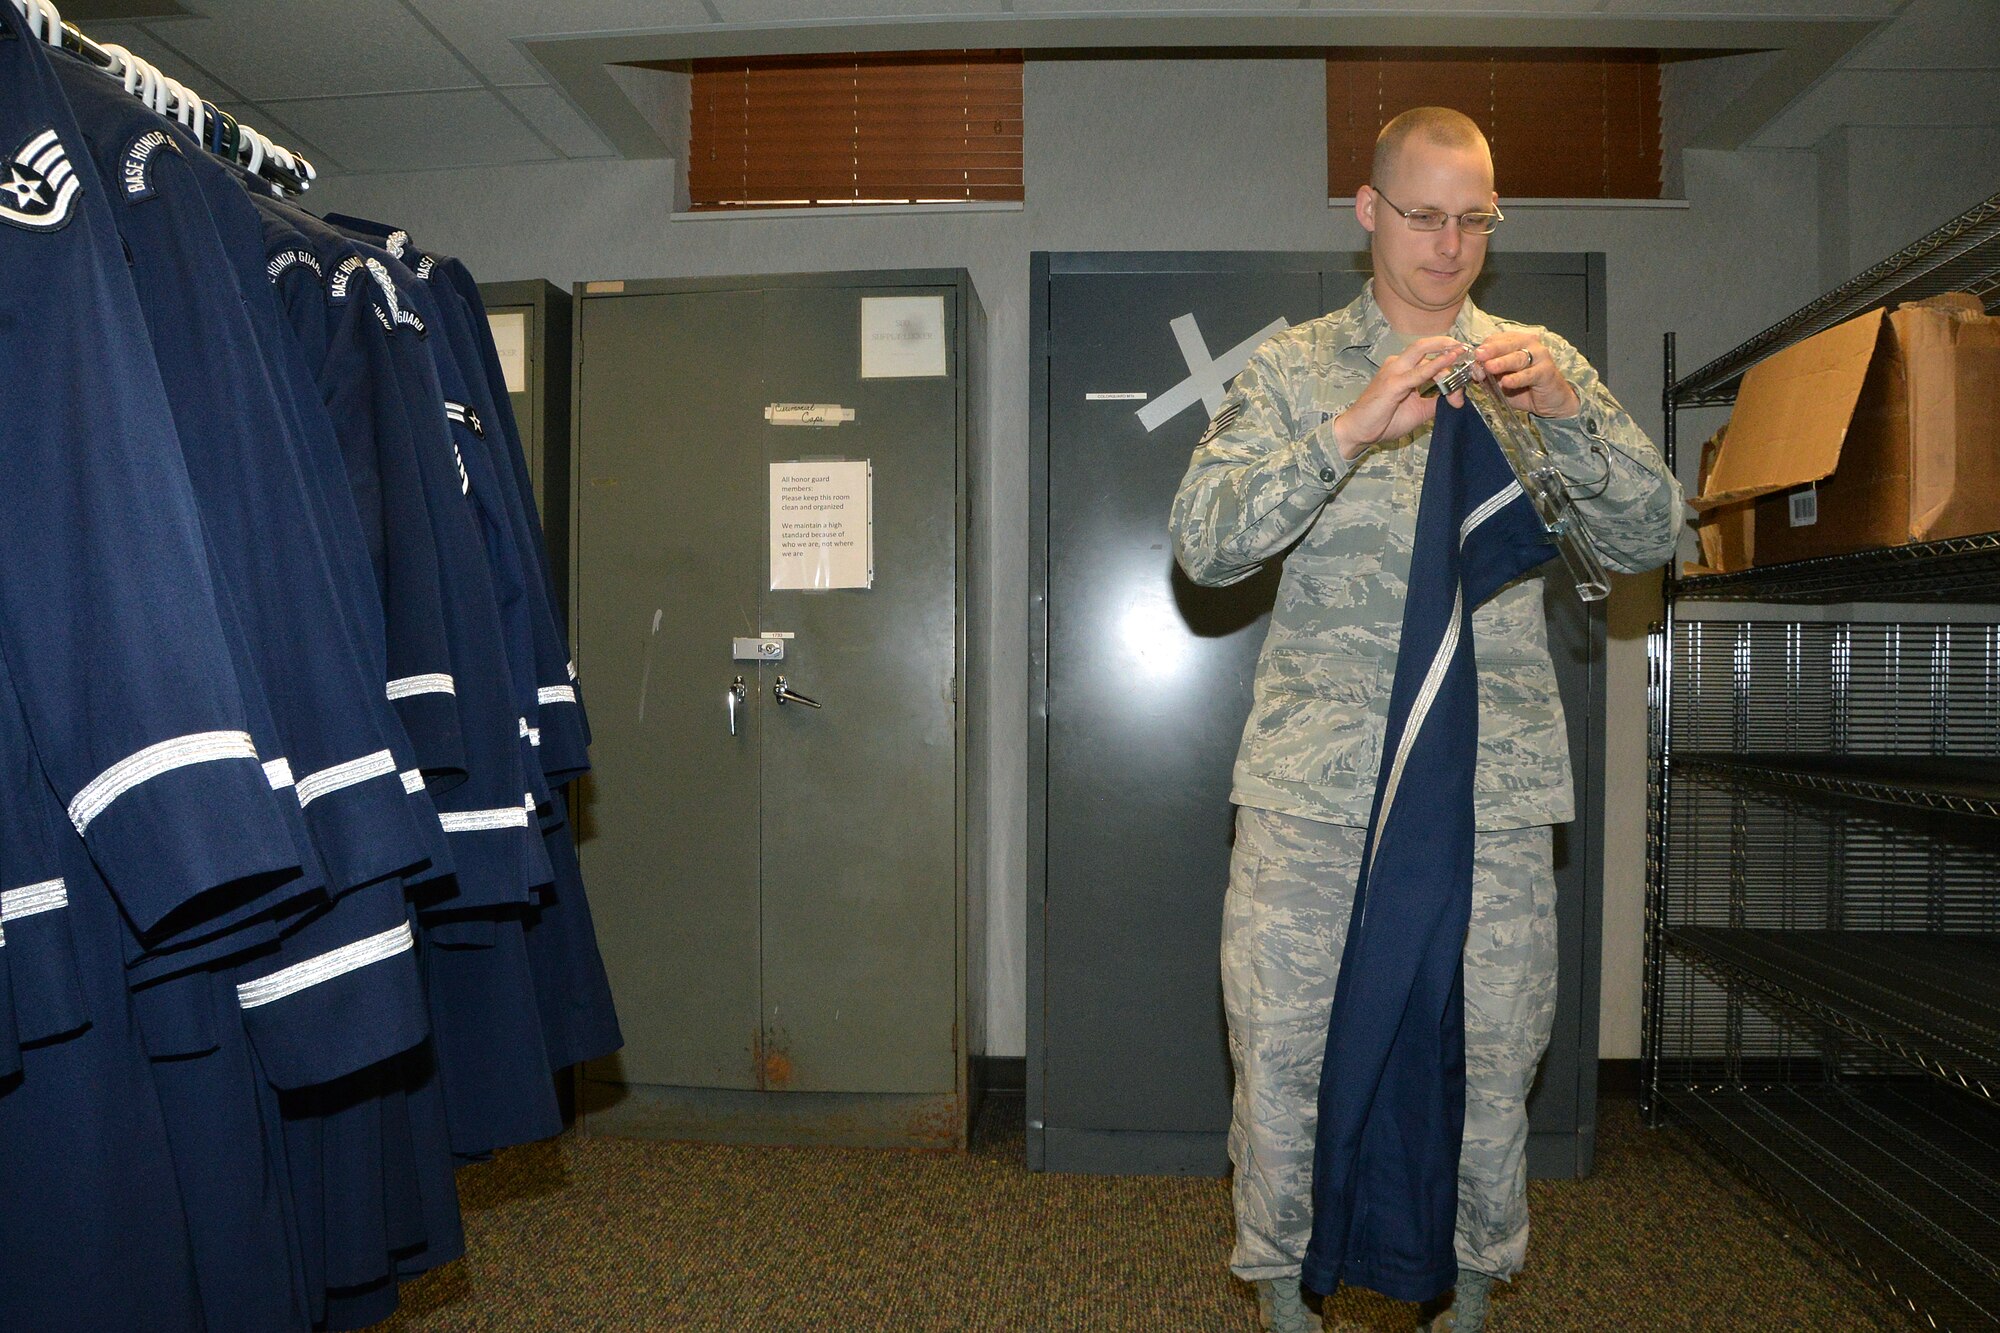 U.S. Air Force Staff Sgt. Christopher Burke’s, 55th Wing Honor Guard NCO in charge, hangs a pair of Honor Guard uniform pants Aug. 7 at Offutt Air Force Base, Nebraska. Burke collects uniforms from outgoing honor guard Airmen in order to pass them down to incoming guardsmen. (U.S. Air Force photo by Dana P. Heard)